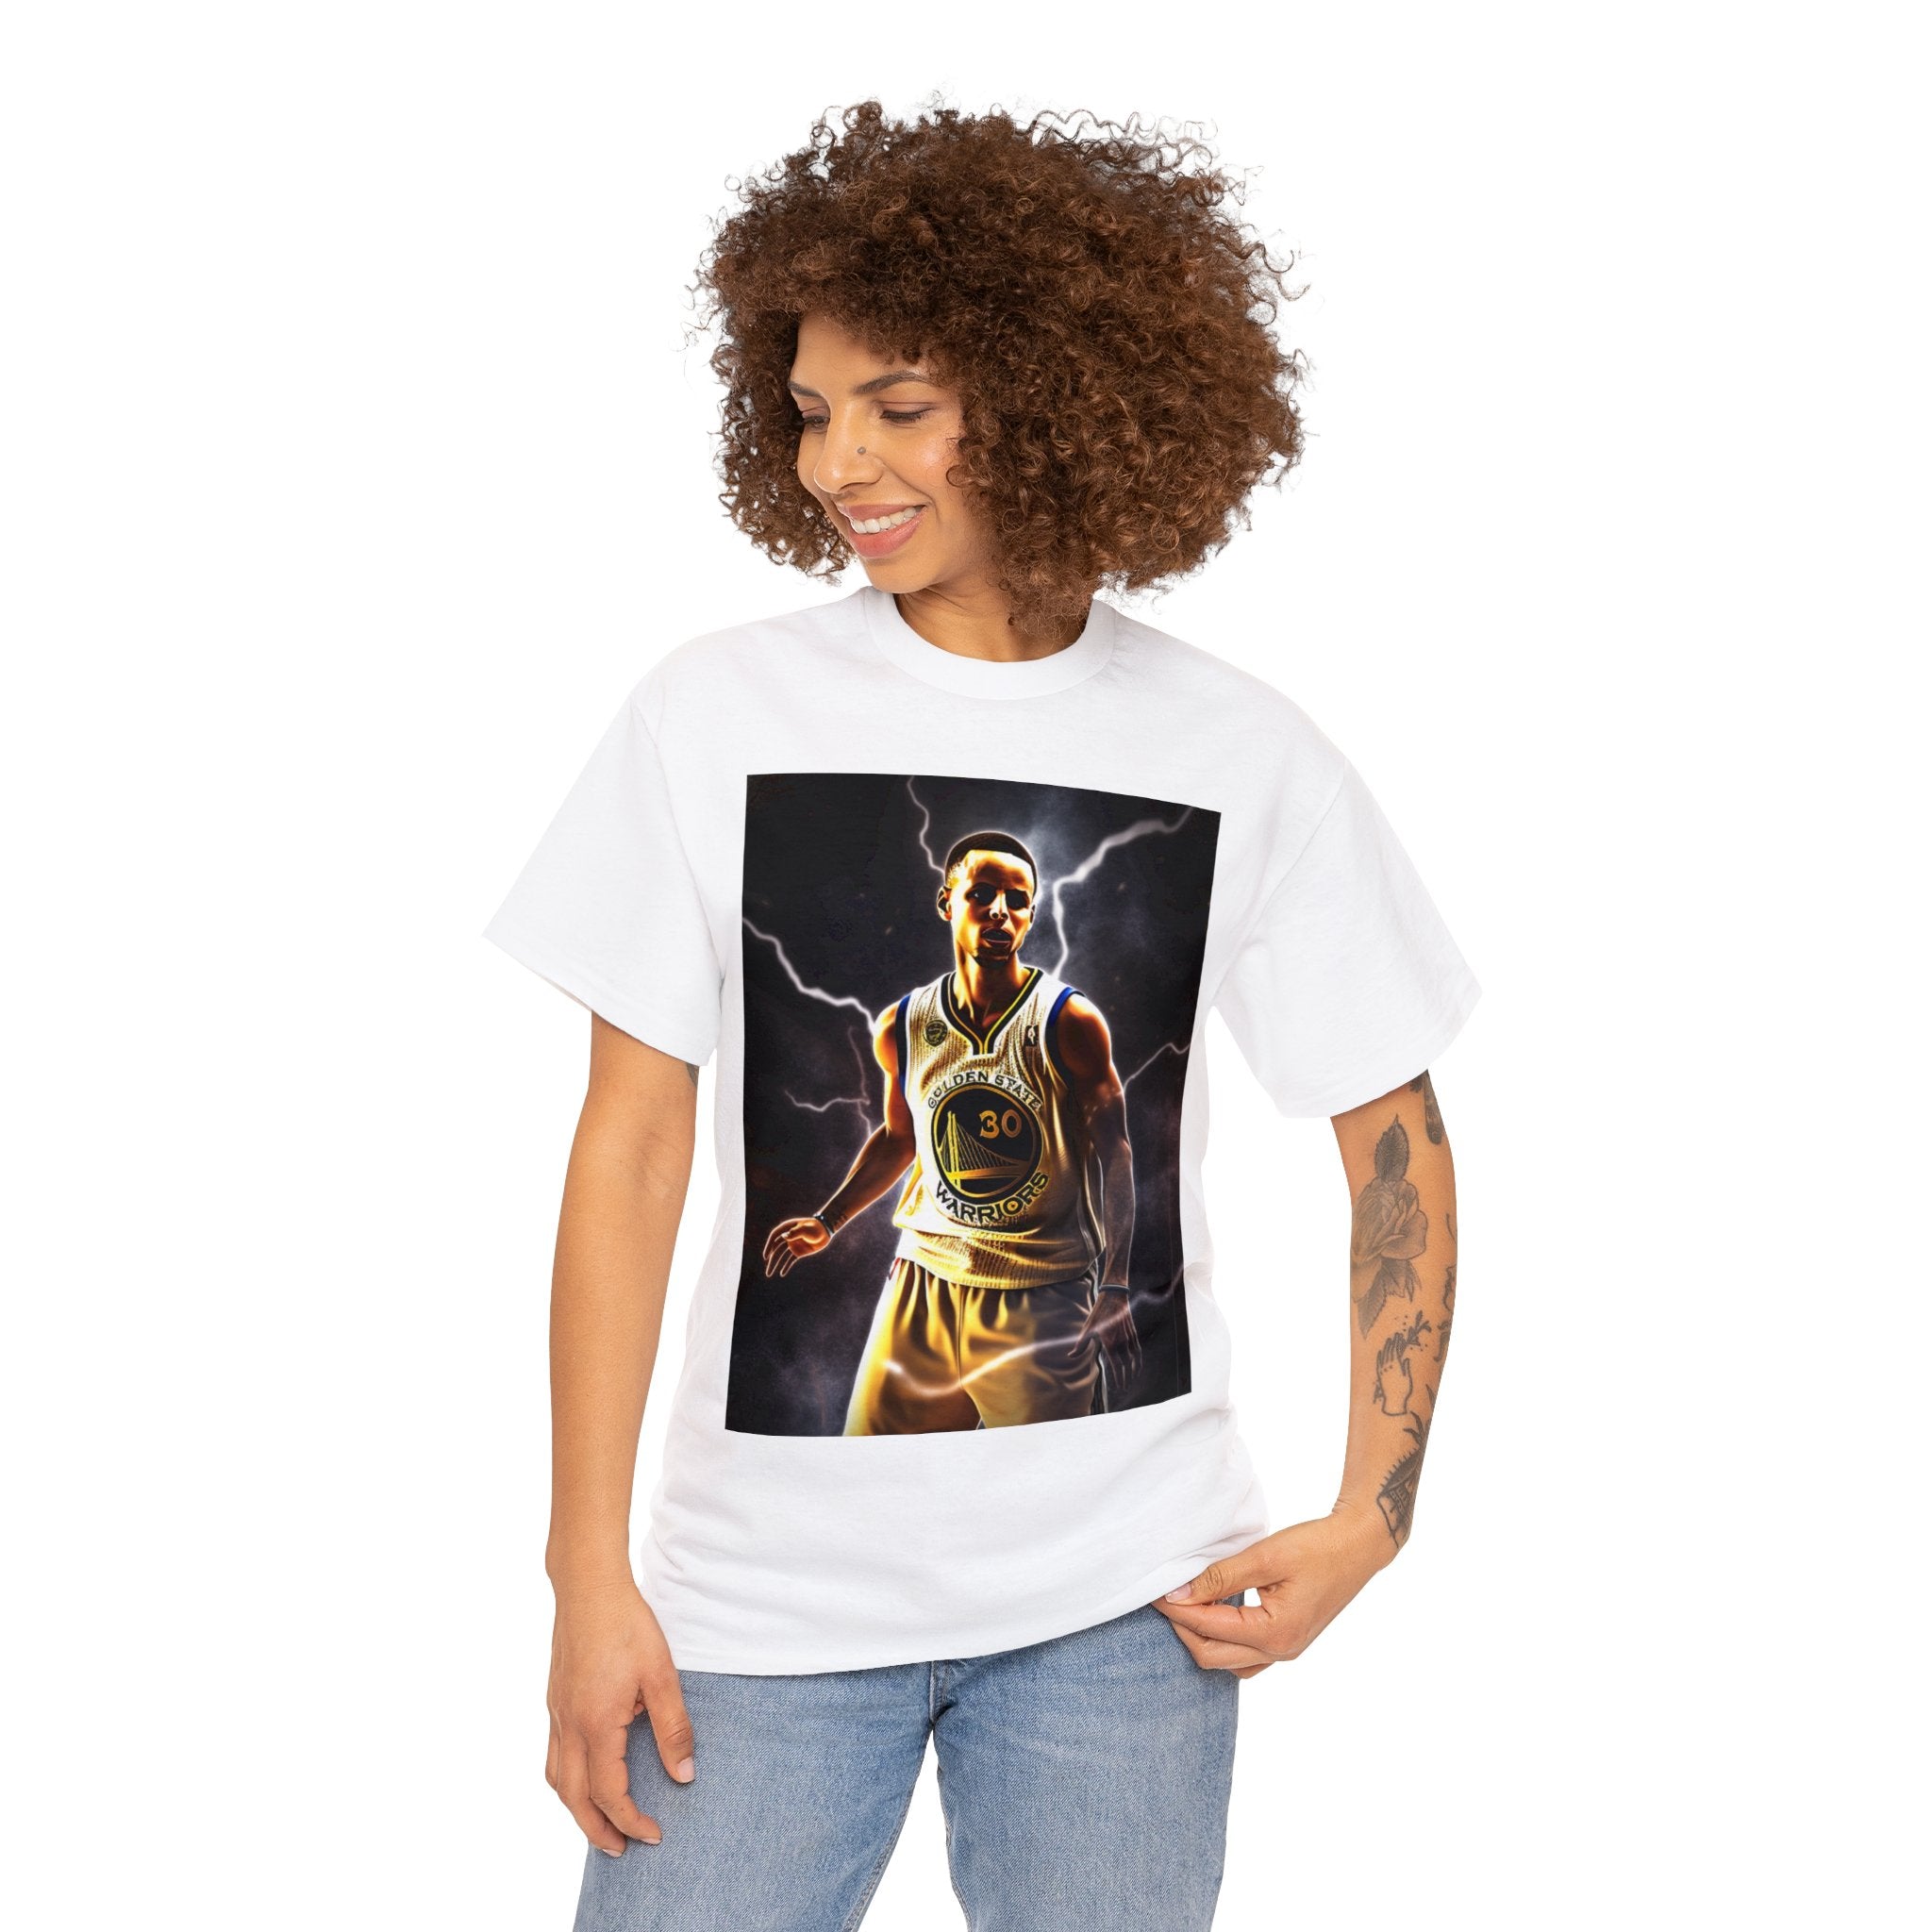 "Beyond the Arc: 3-Point Lightning Strike" Unisex Heavy Cotton Tee - A Tribute to Basketball's Ultimate Sharpshooter, Inspired by the Legendary Skills of The Chef Himself, S.C.